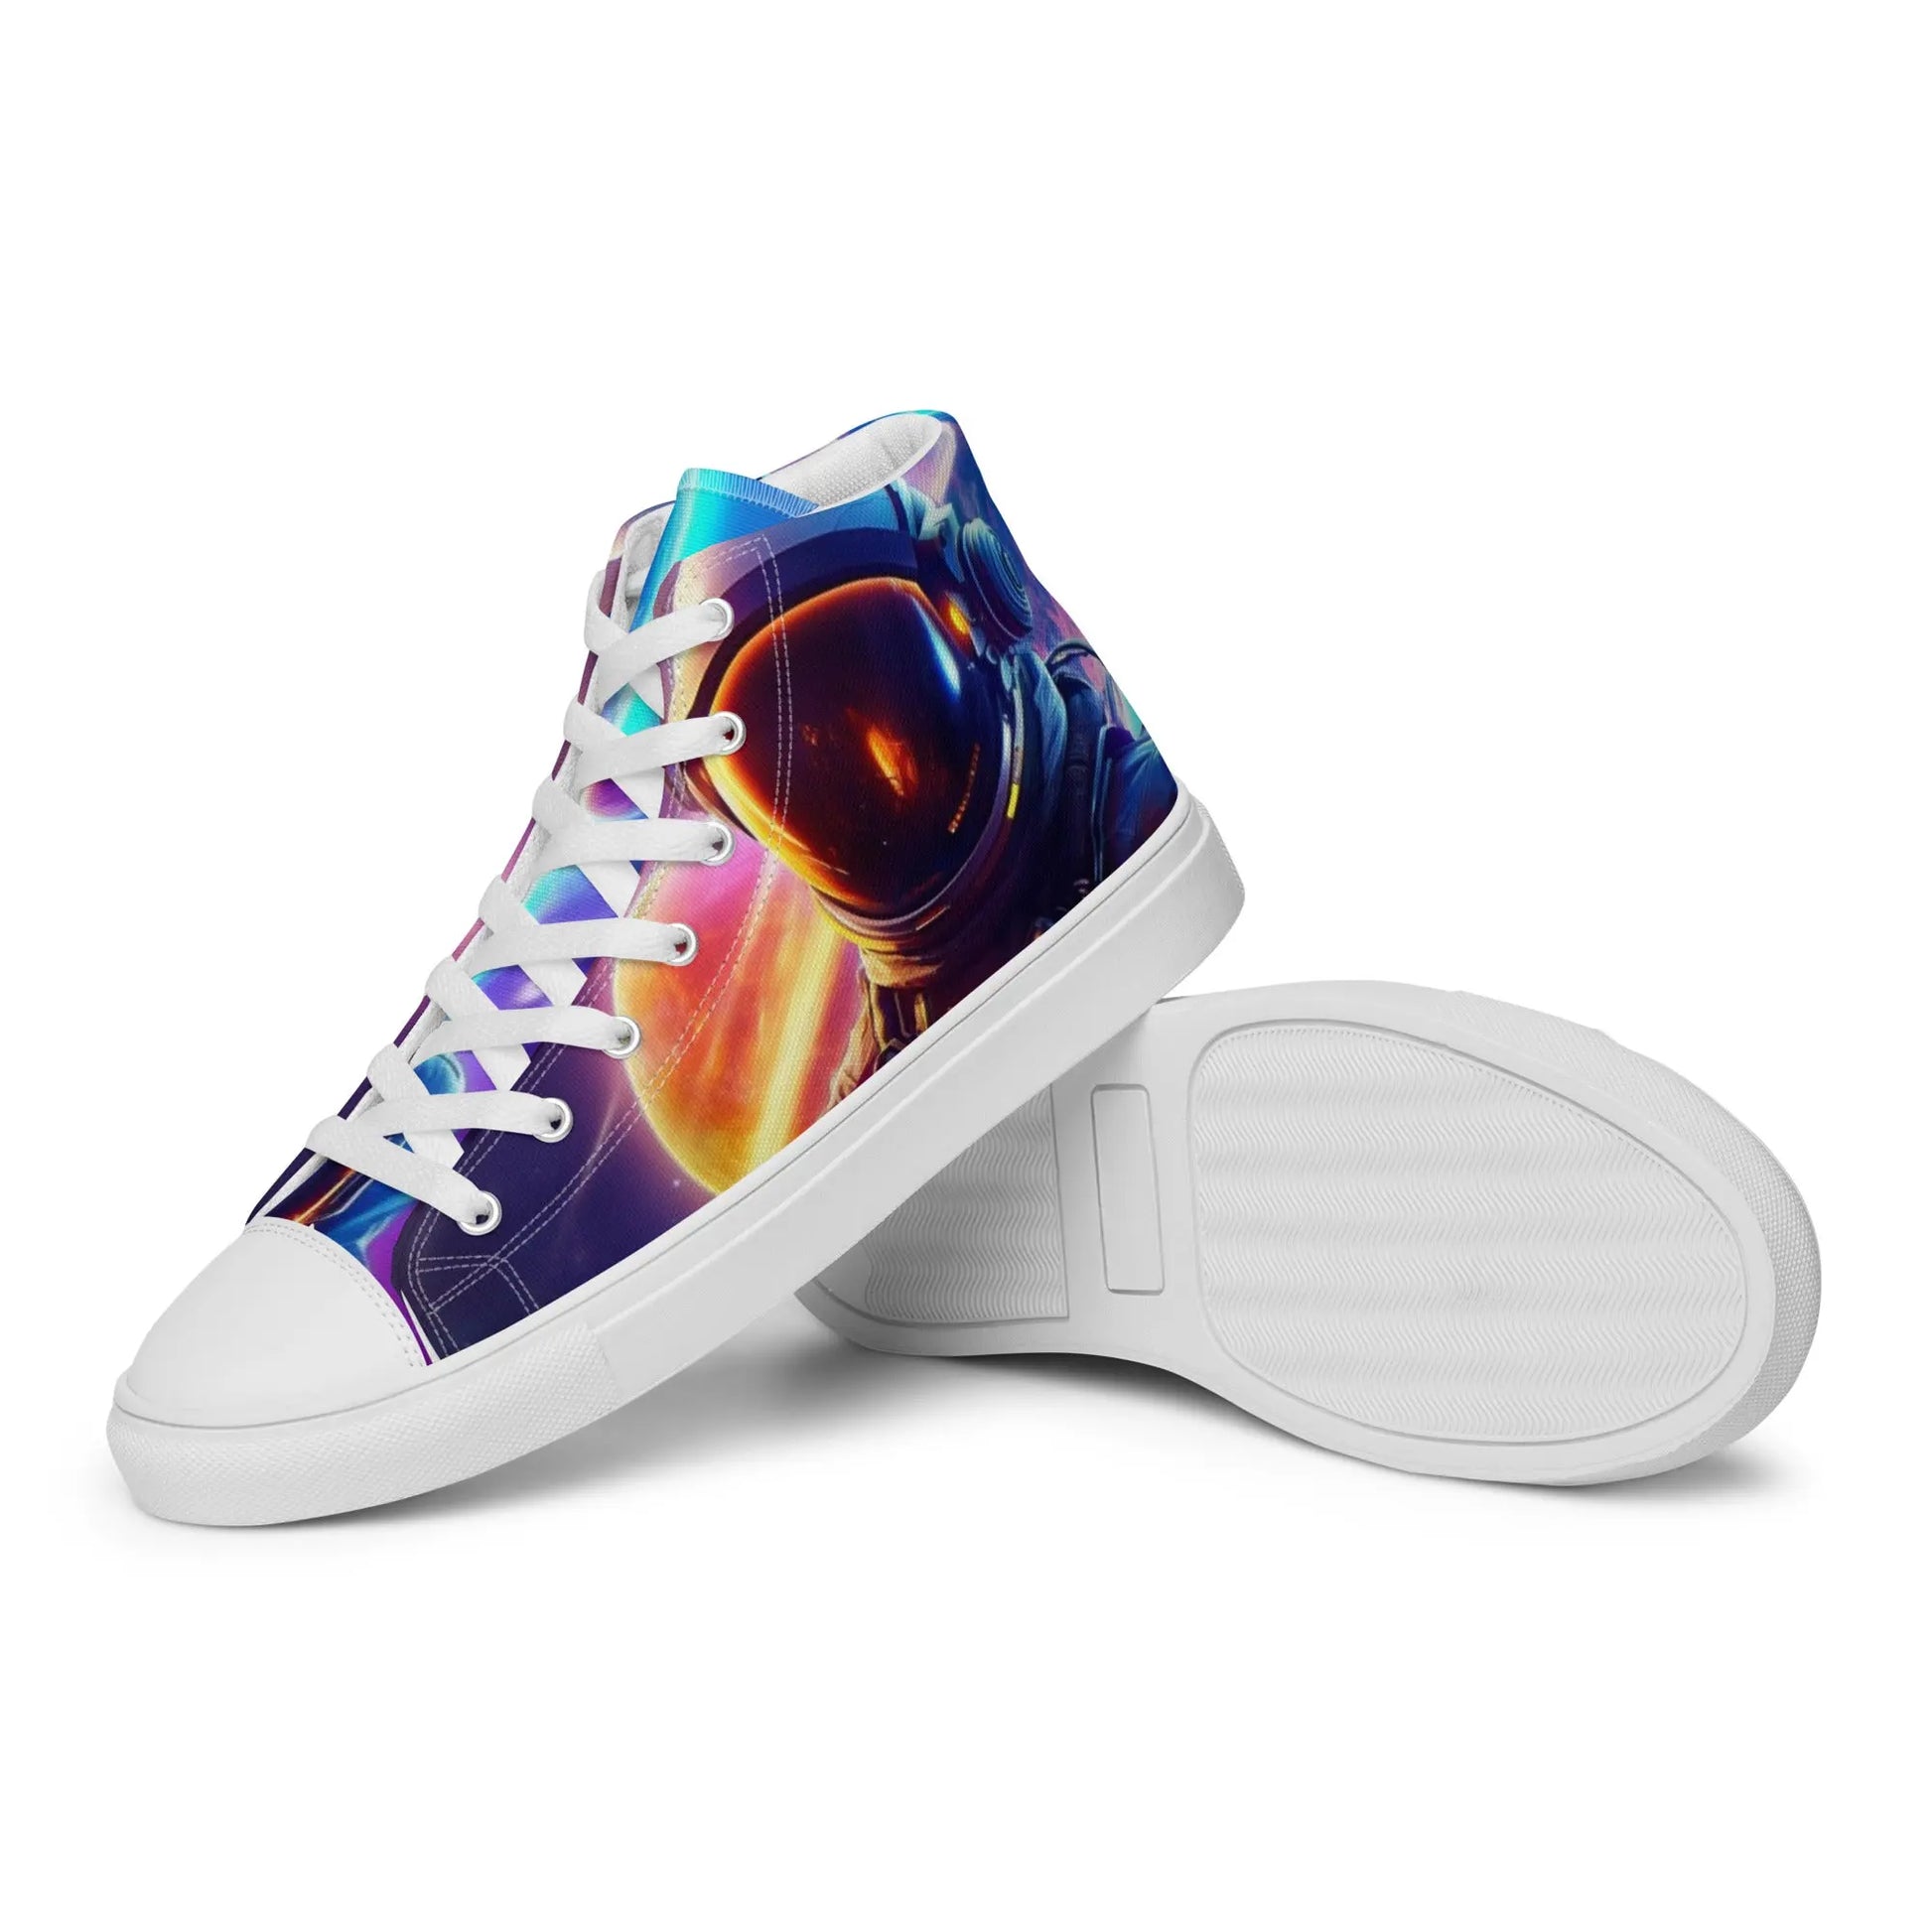 AstroGlow High Top Sneakers: AI-Engineered, Illuminate Your Journey with Unisex, Durable, Comfortable, Space-Inspired Design Kinetic Footwear